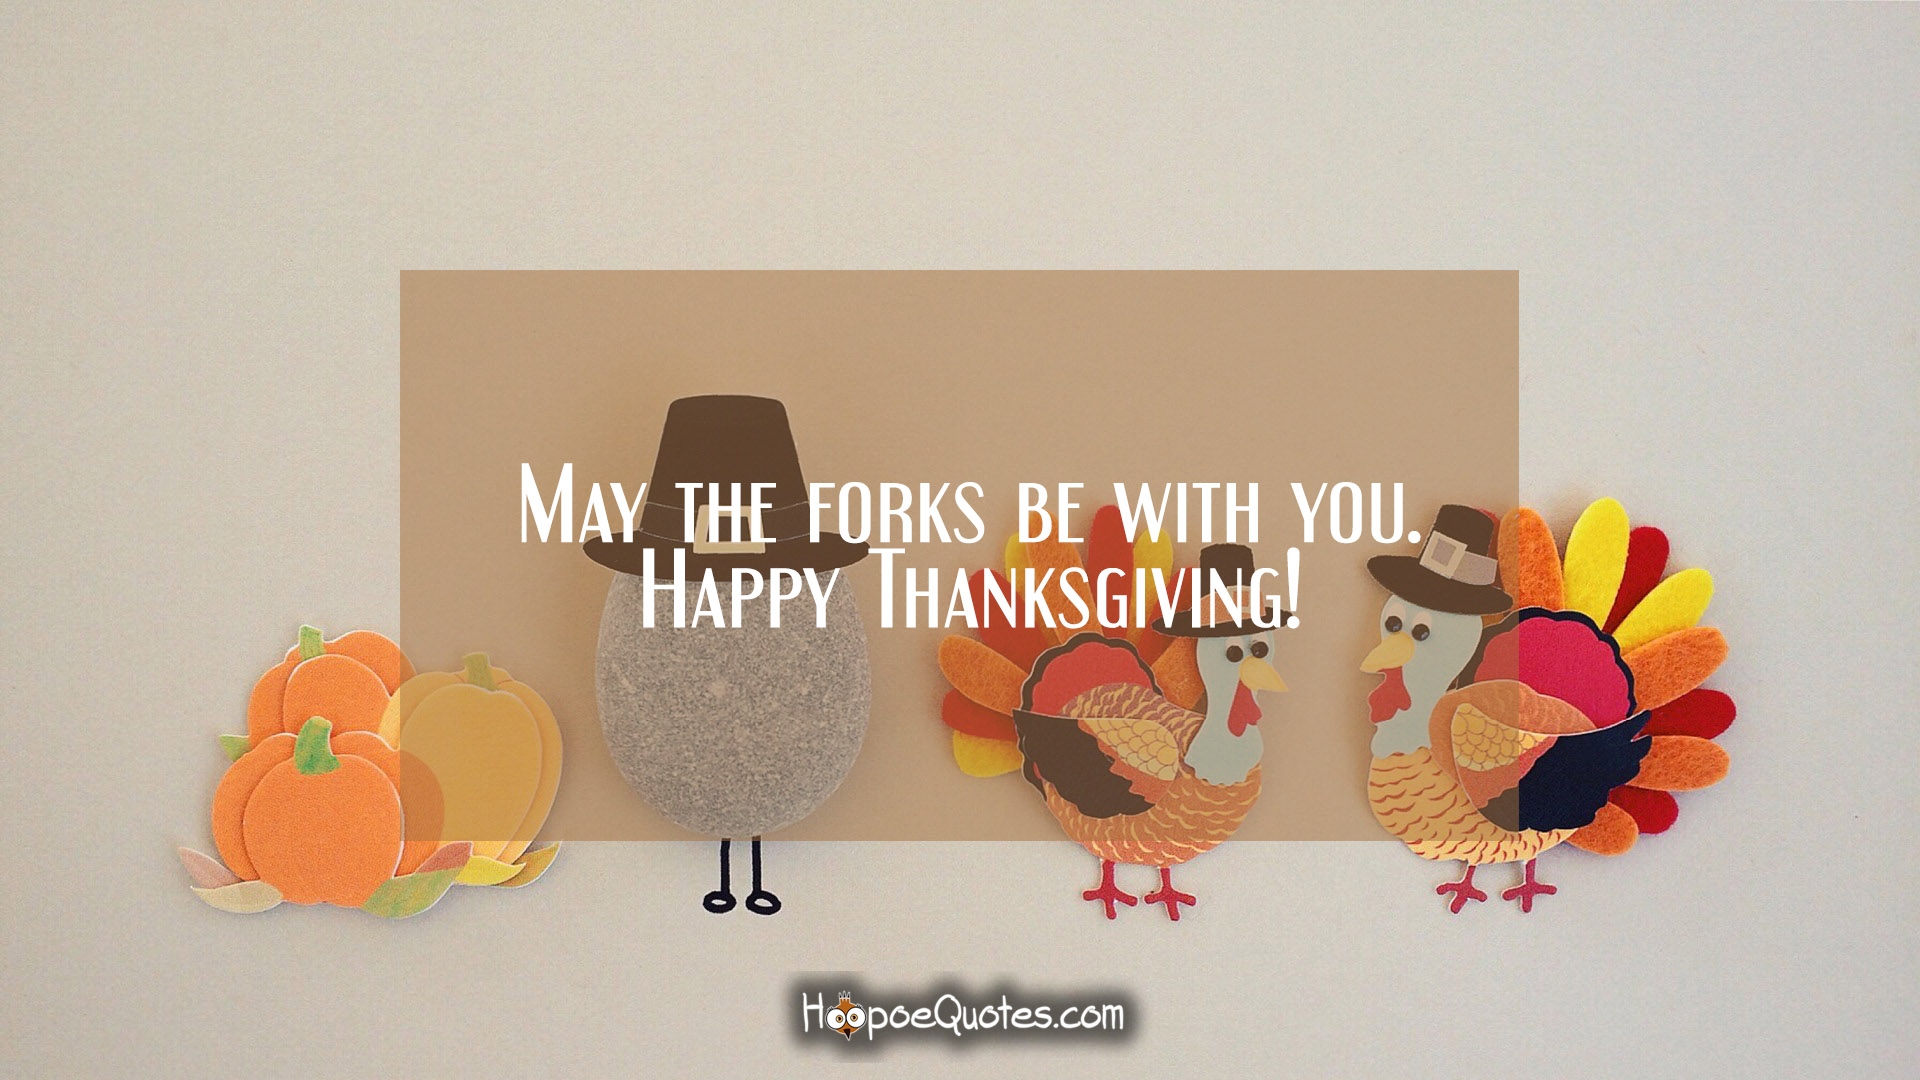 General 1920x1080 Thanksgiving holiday typography quote